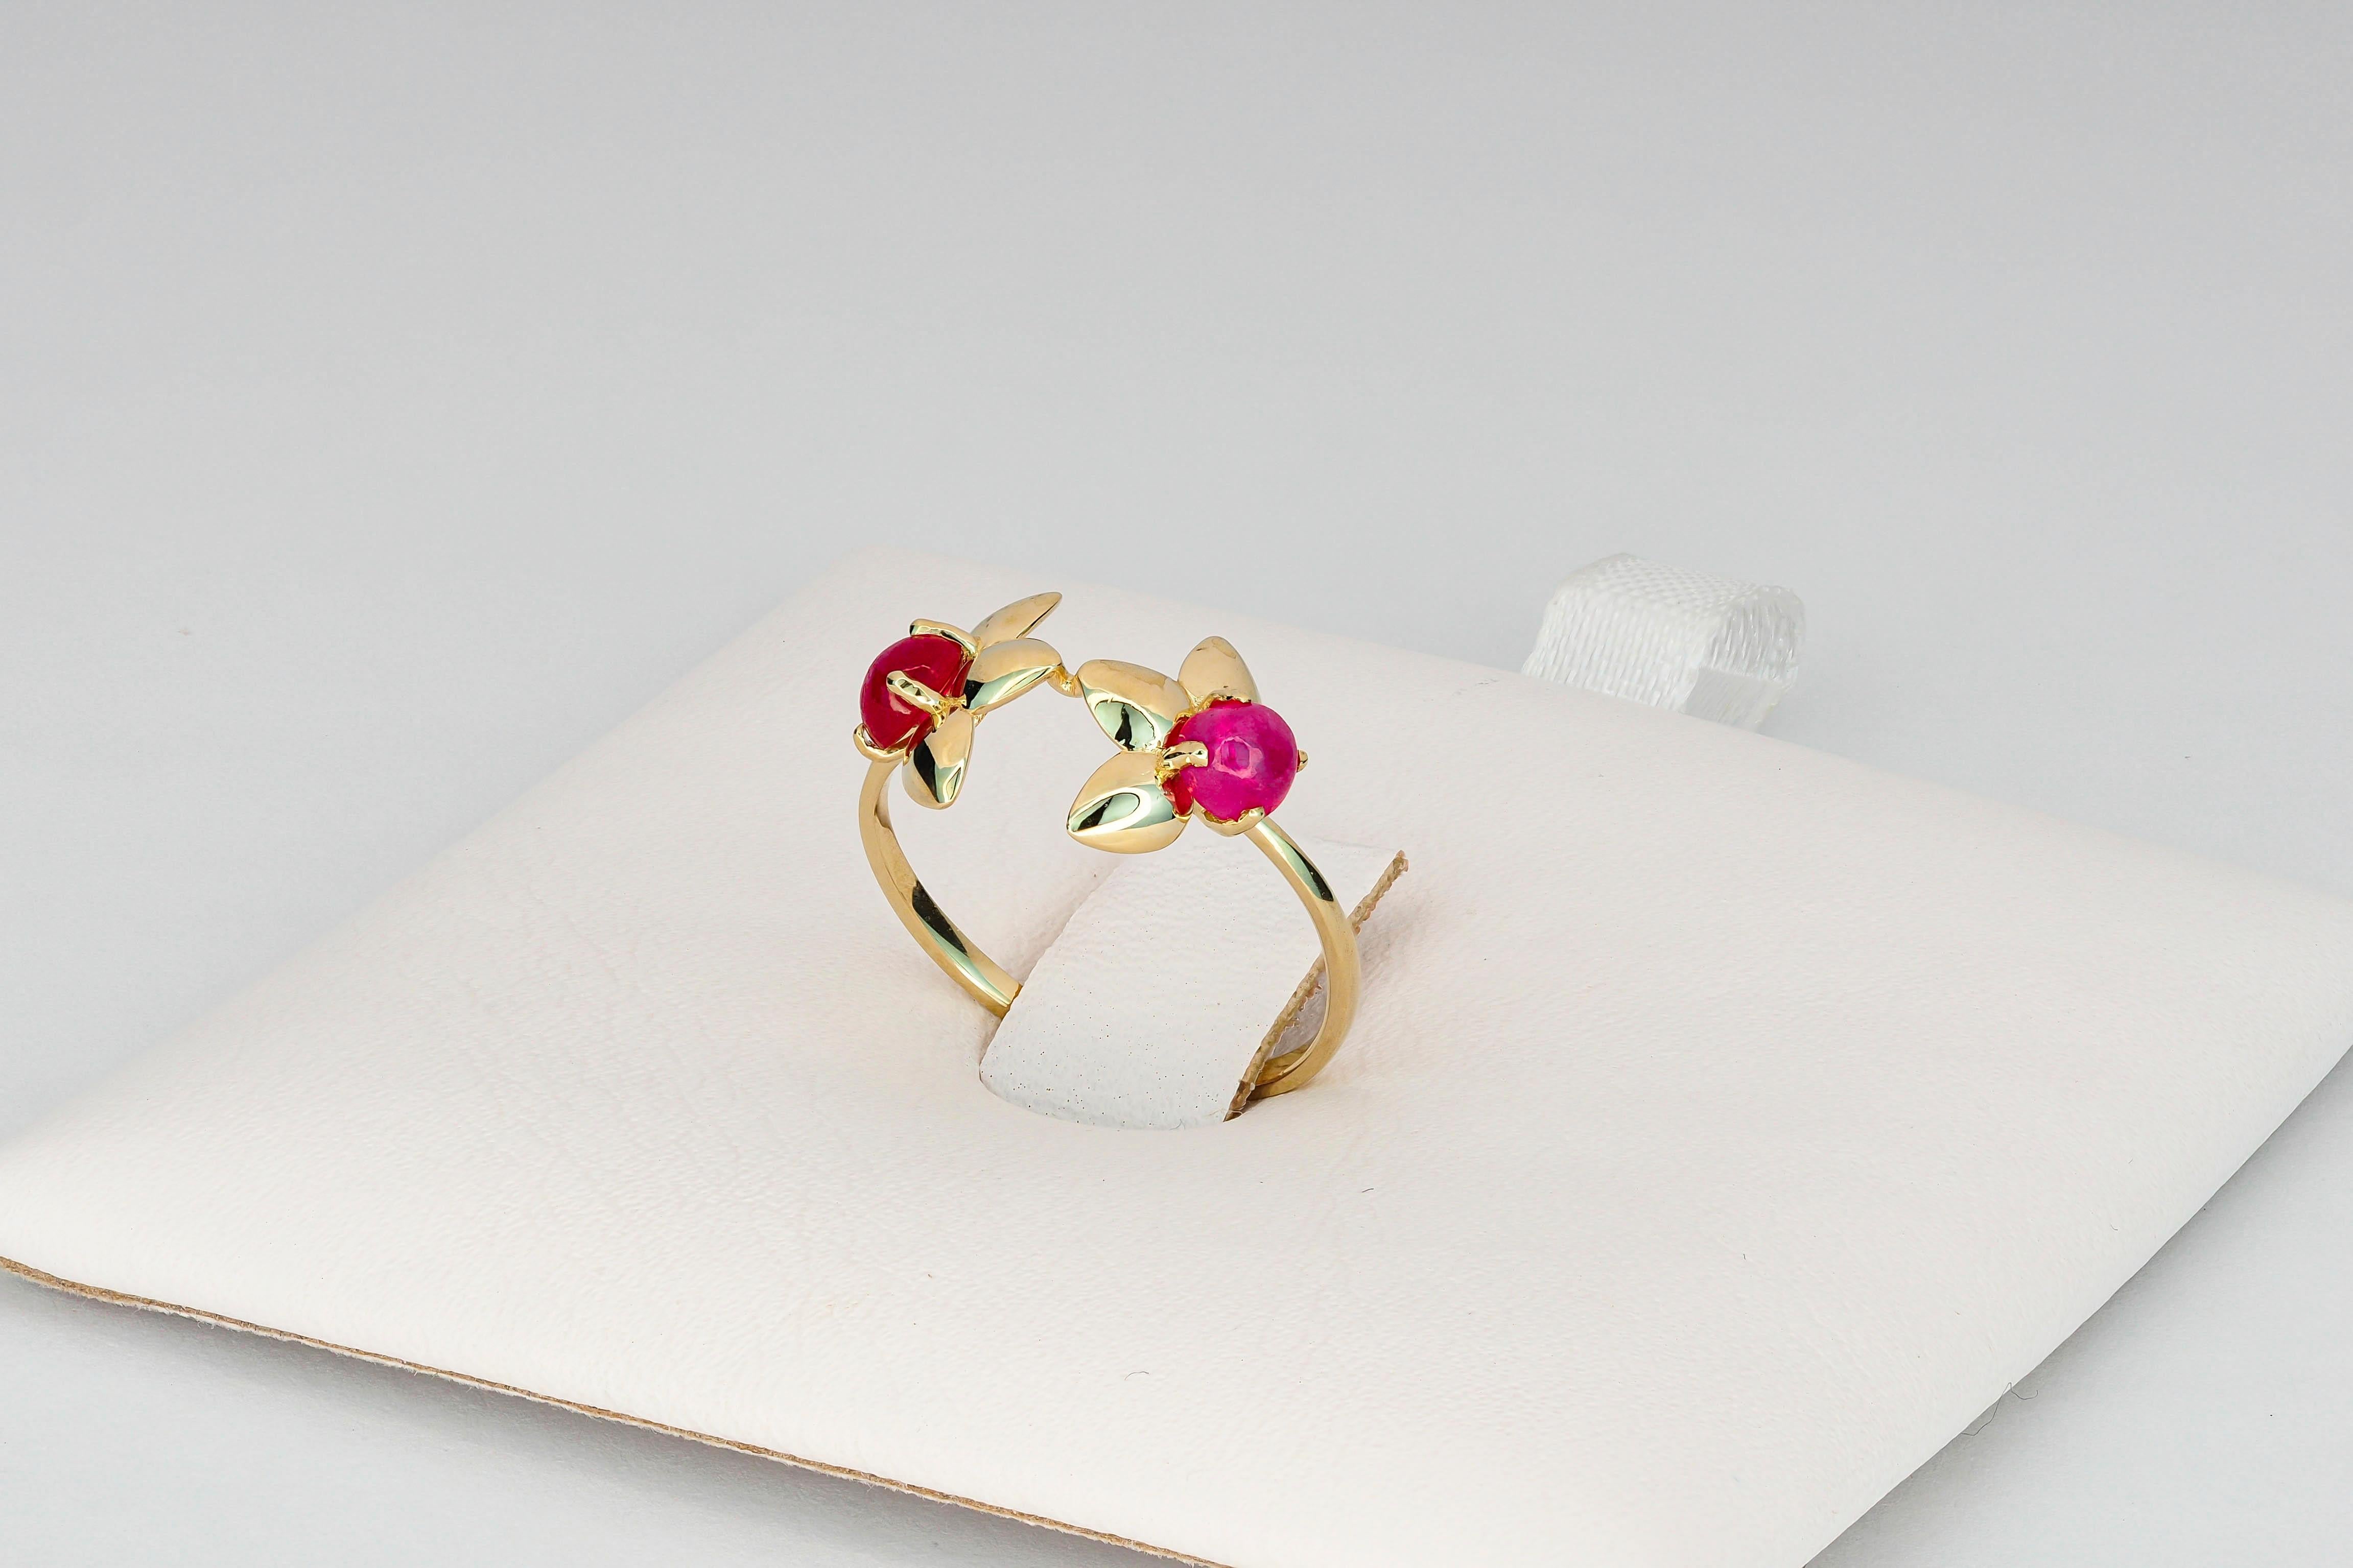 For Sale:  14 Kt Gold Ring with 2 Rubies, 3 Petal Flower Gold Ring, Trillium Ring 7